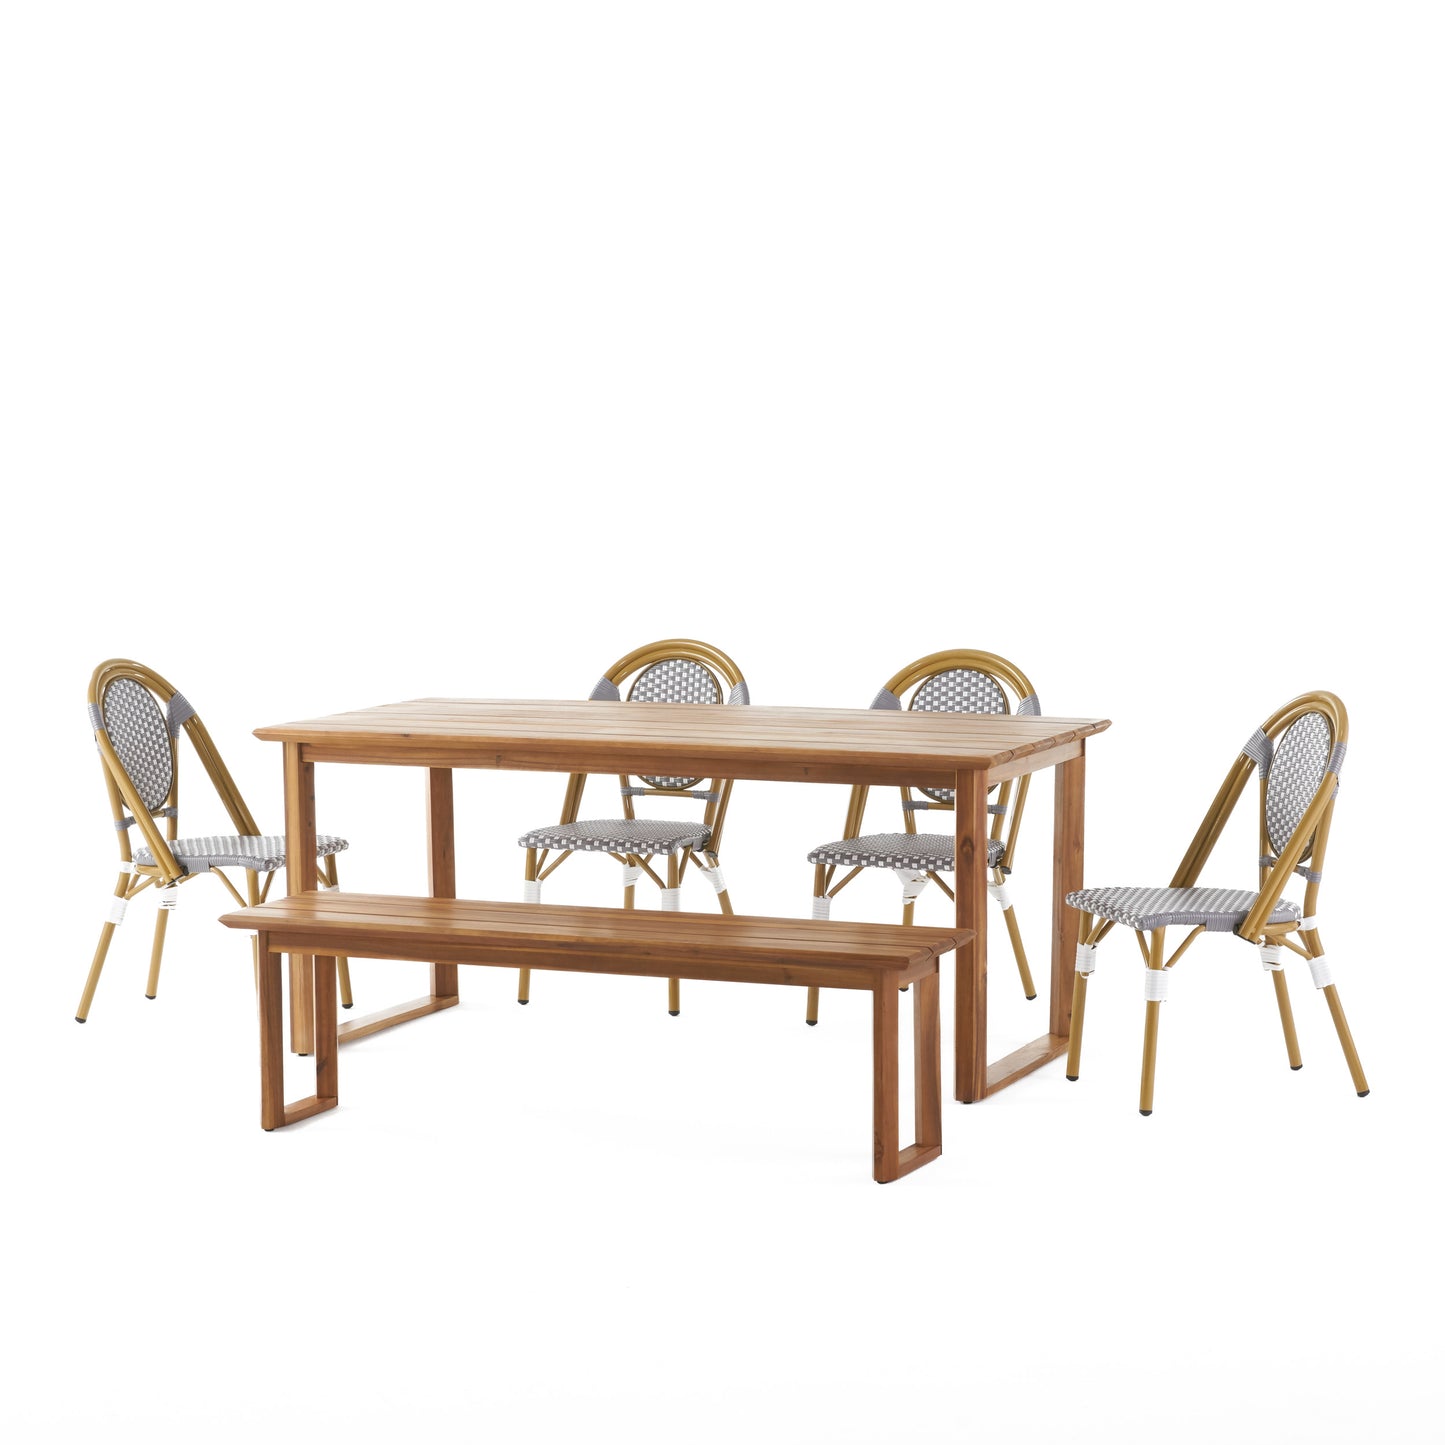 Varva Outdoor Acacia Wood and Wicker 6 Piece Dining Set with Bench